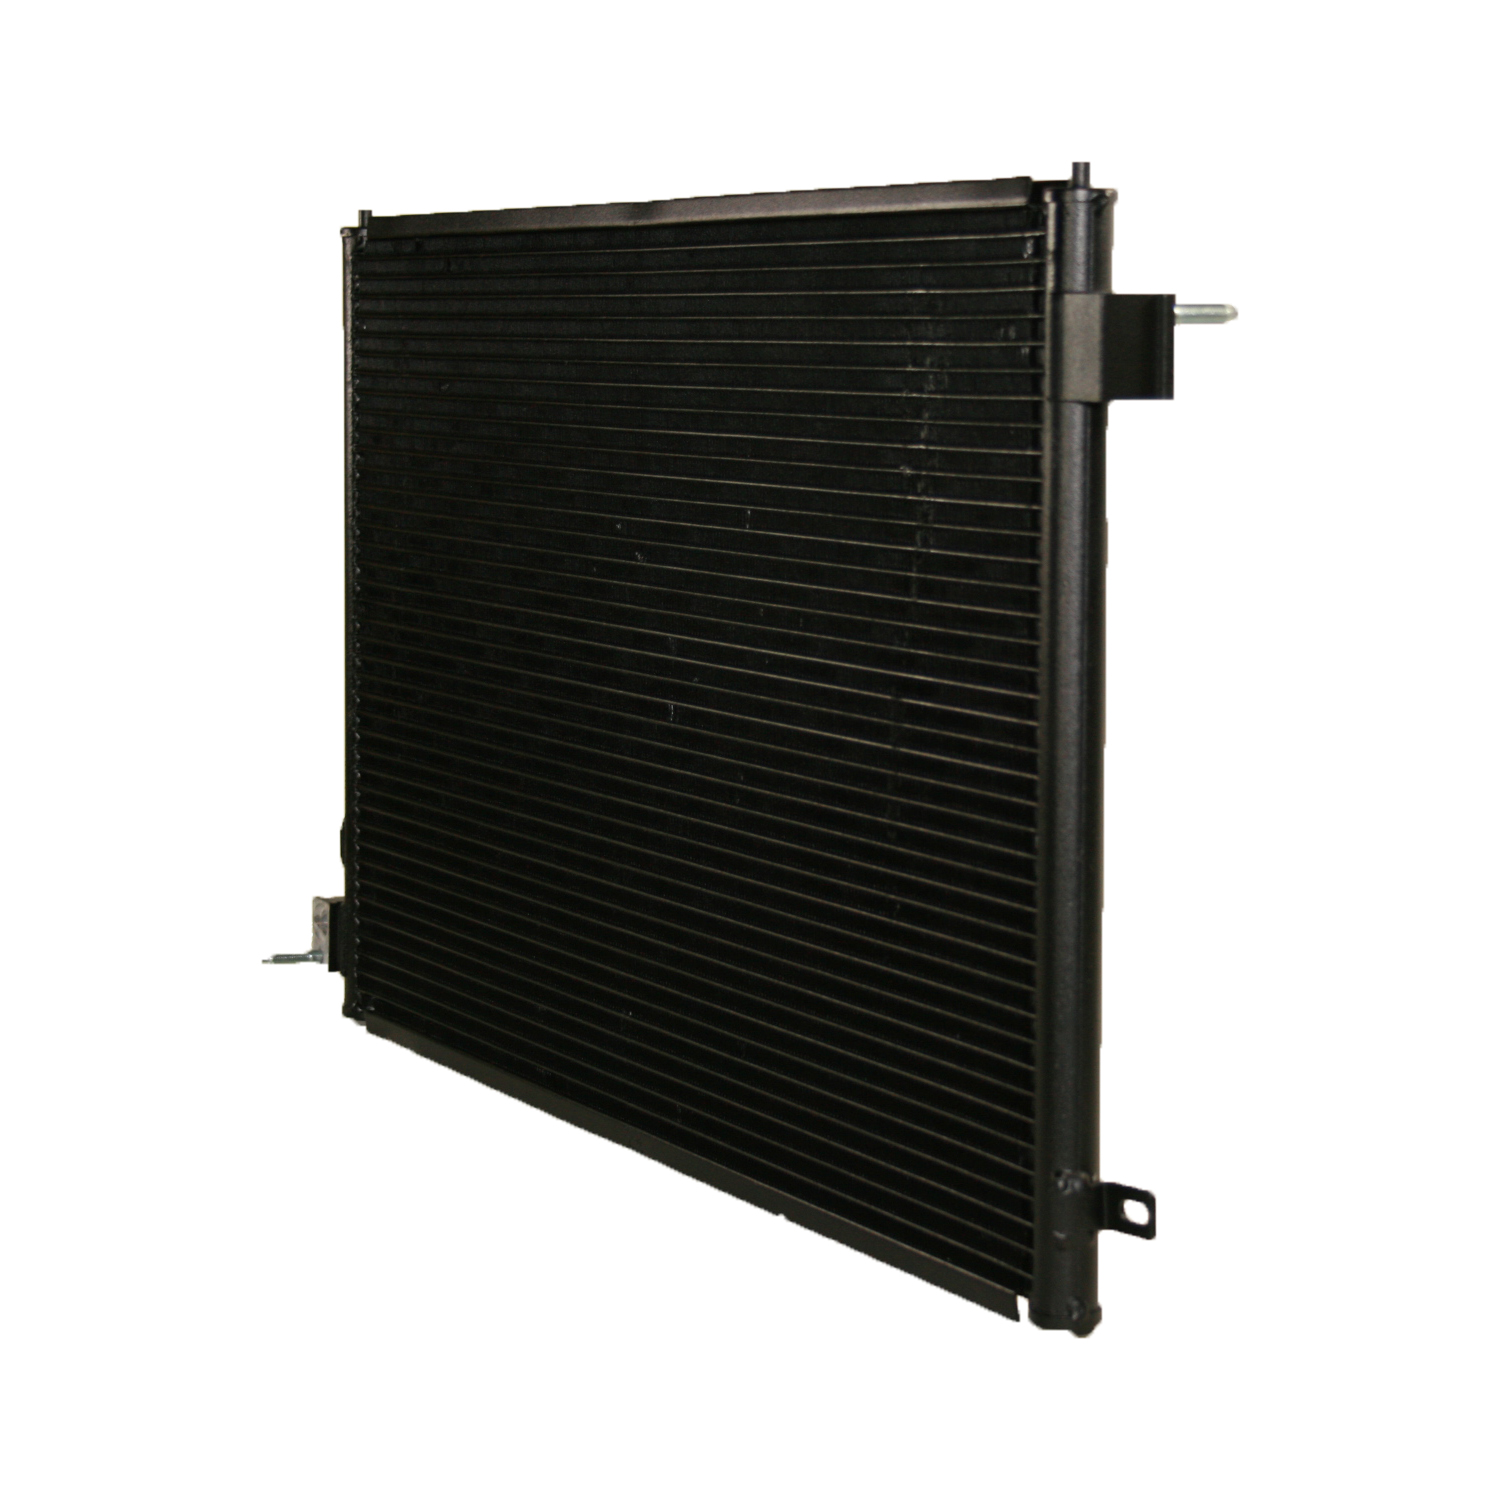 TCW Condenser 44-3020 New Product Image field_60b6a13a6e67c